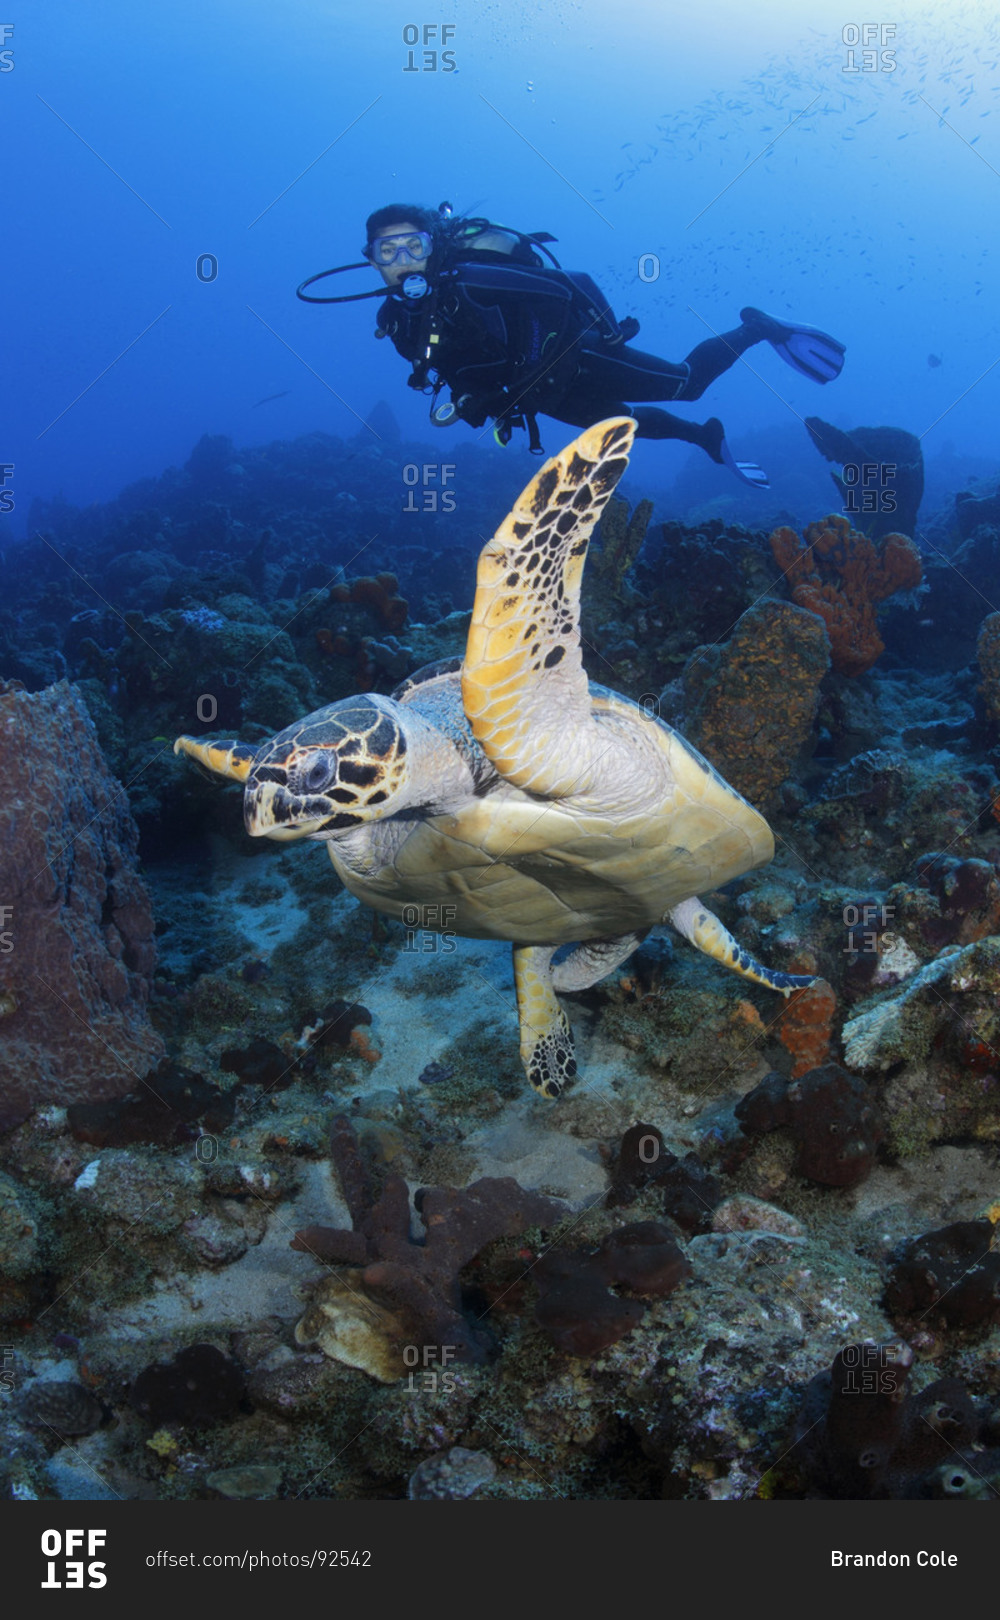 A Hawksbill Sea Turtle swims in front of a female scuba diver in the Caribbean.